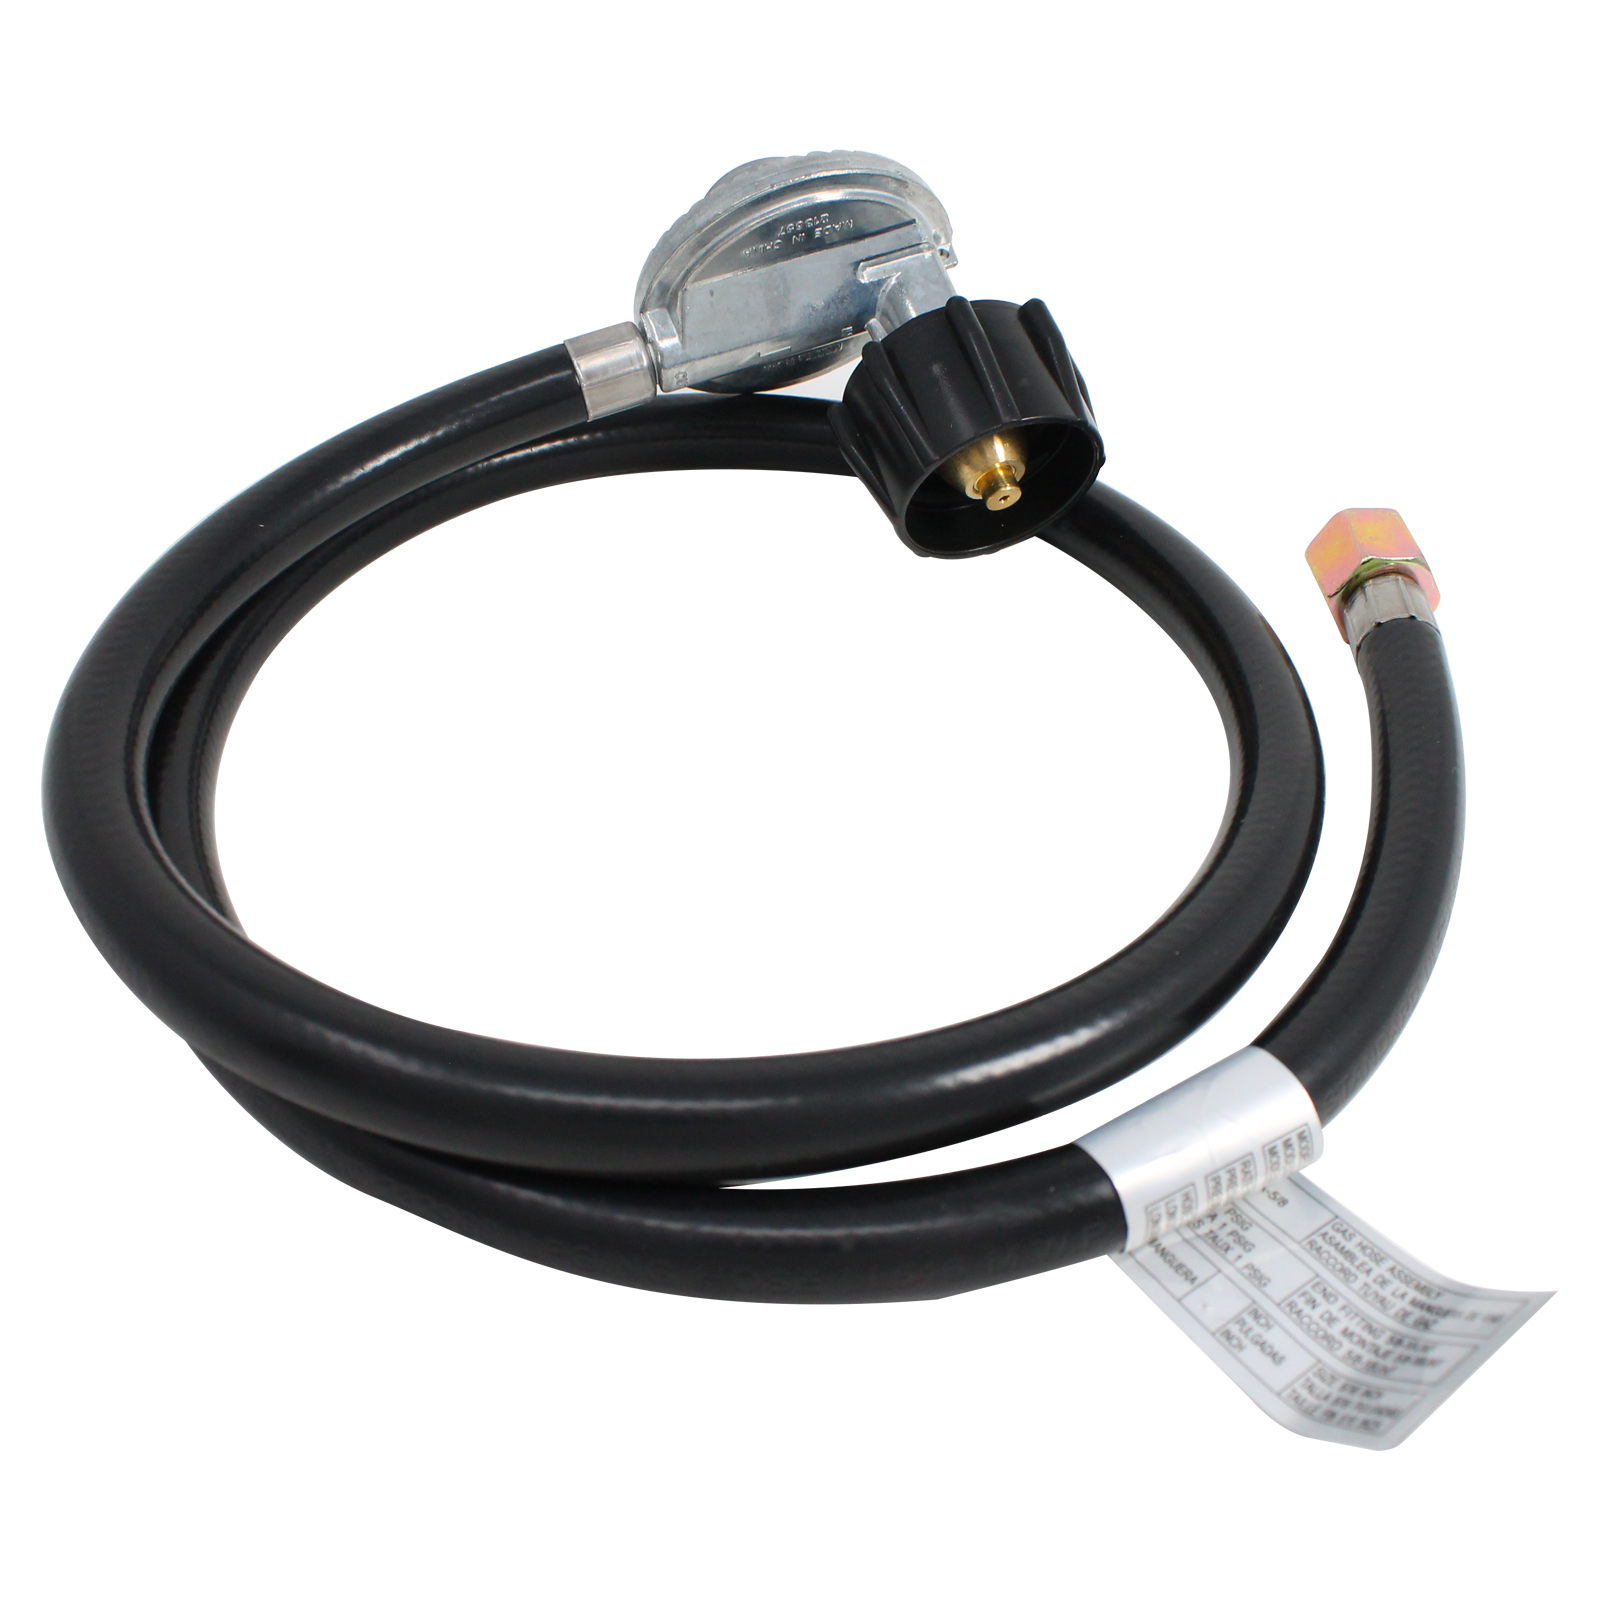 BBQ Gas Grill Propane Regulator Hose Replacement Parts for Weber GENESIS SILVER B LP SWE (2004) - Compatible Barbeque 41 Inch Regulator and Hose - image 3 of 4